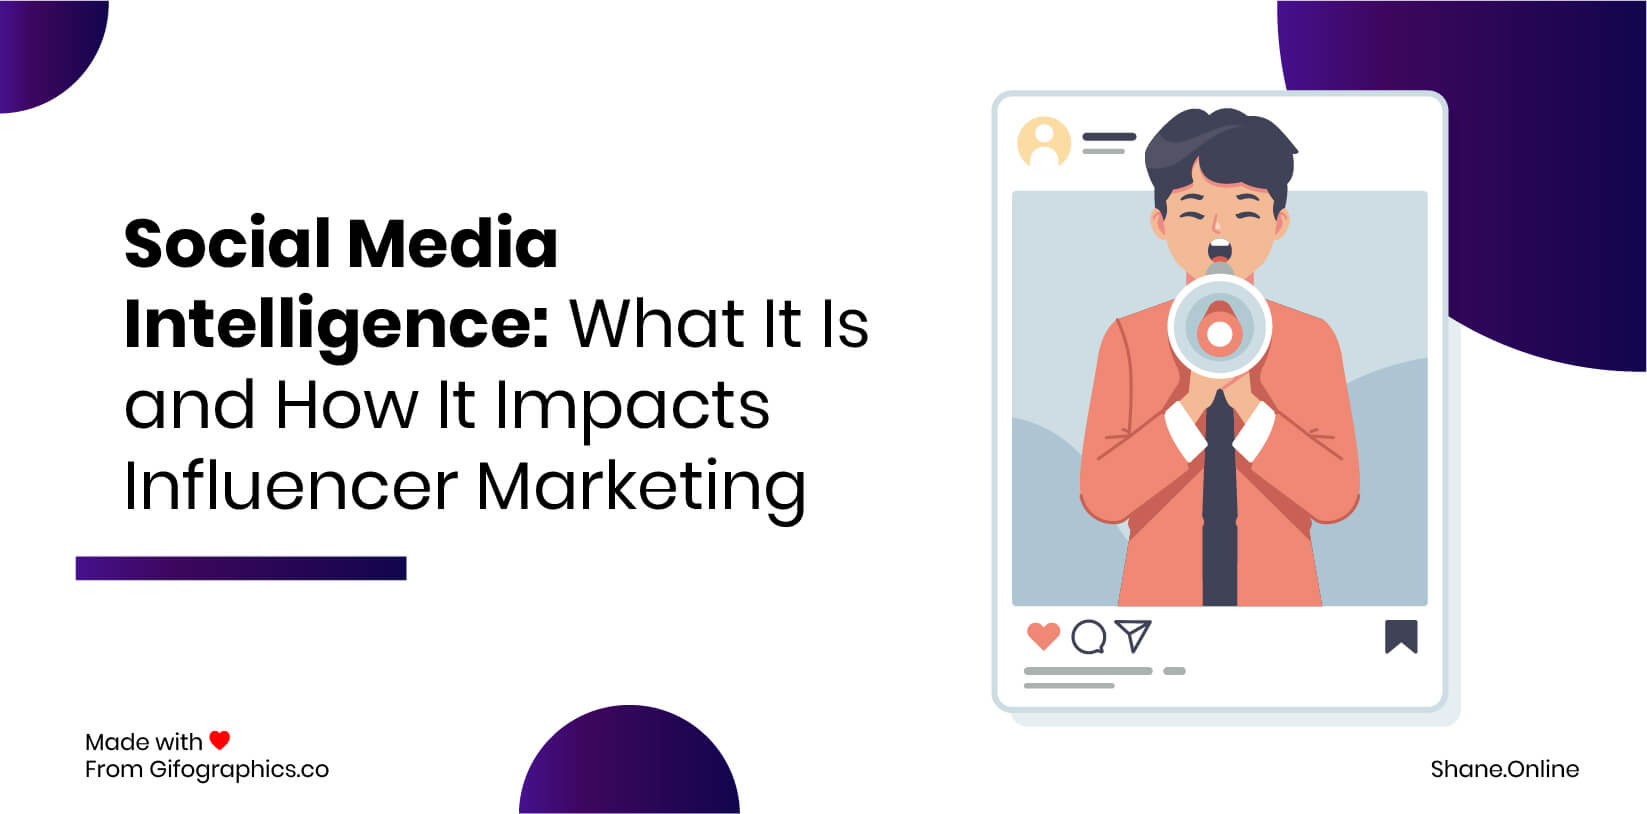 Social Media Intelligence- What It Is and How It Impacts Influencer Marketing